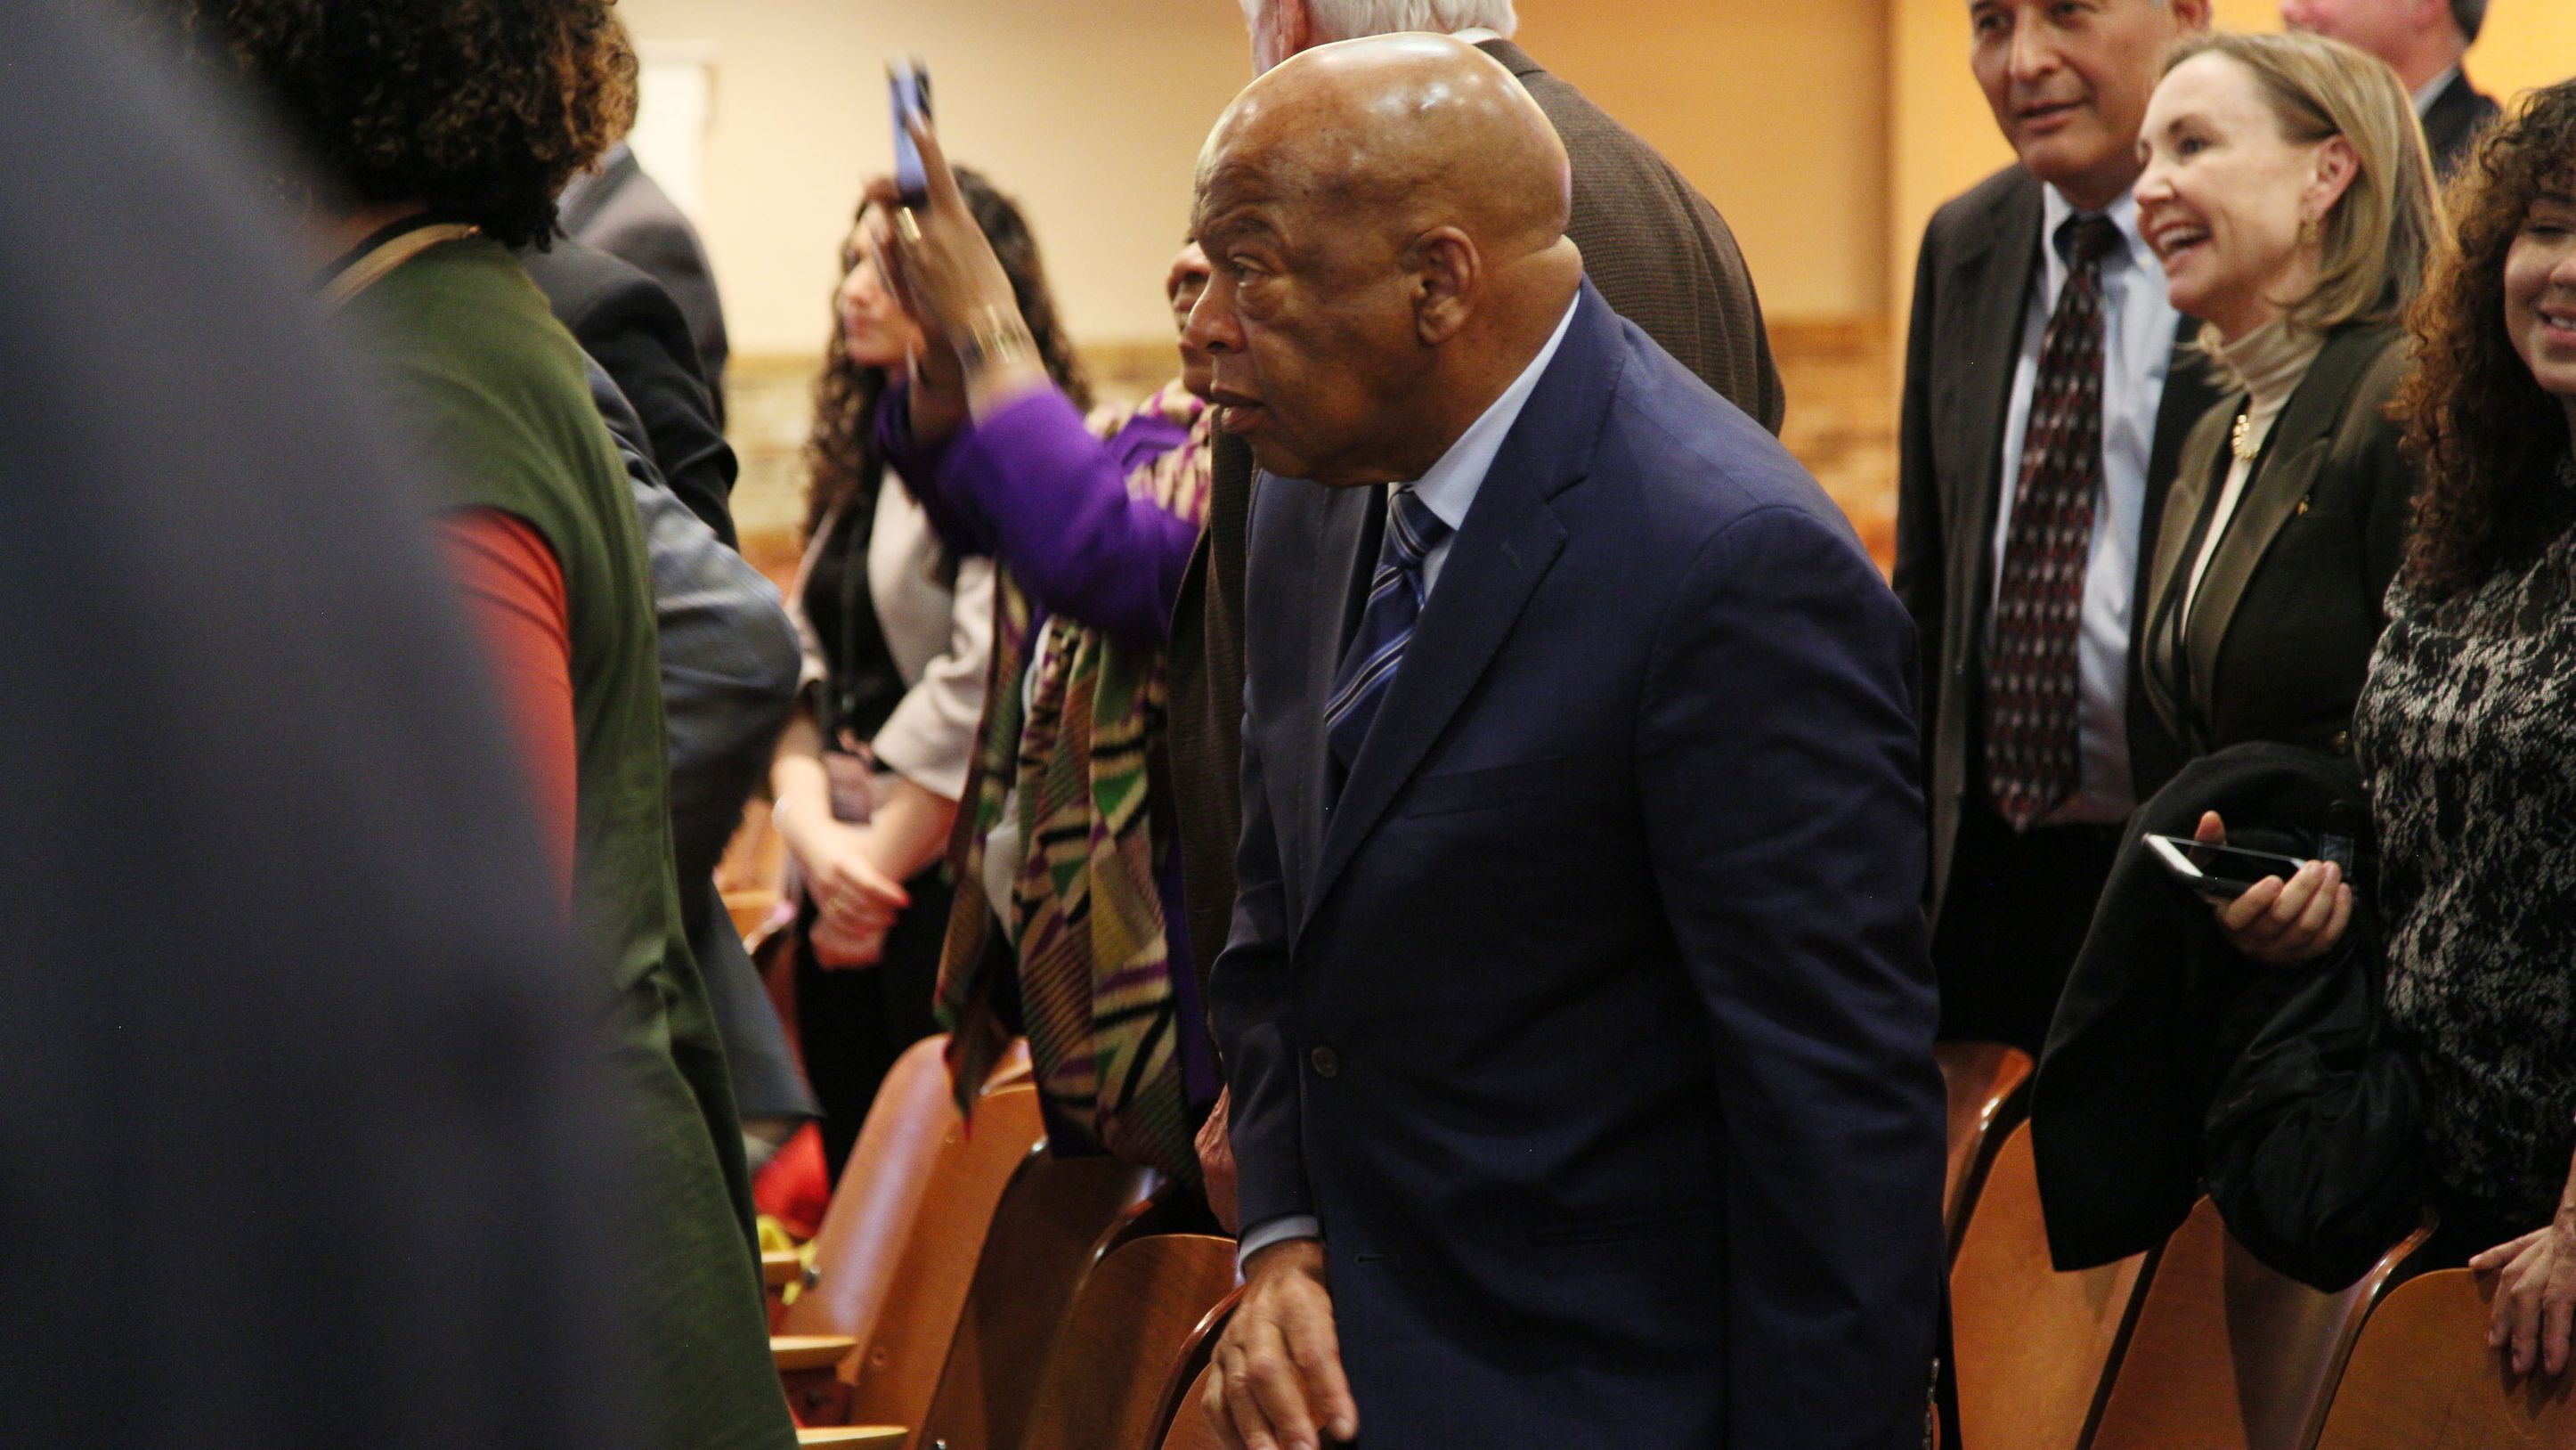 The late United States Rep. John Lewis (D-Ga.) was a civil rights icon.